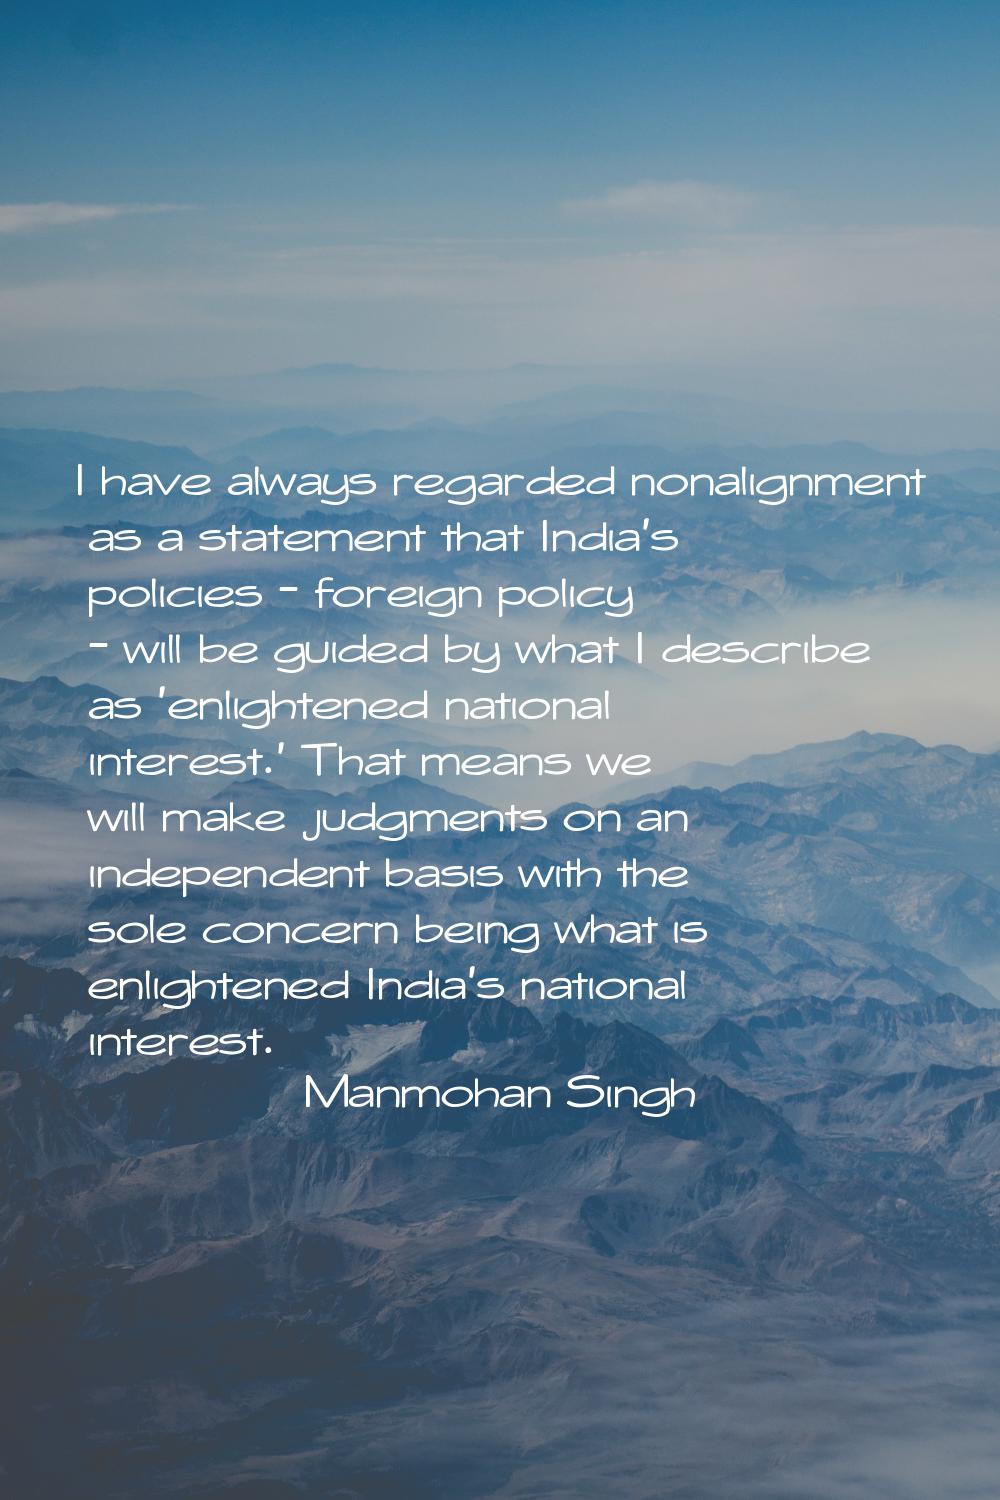 I have always regarded nonalignment as a statement that India's policies - foreign policy - will be